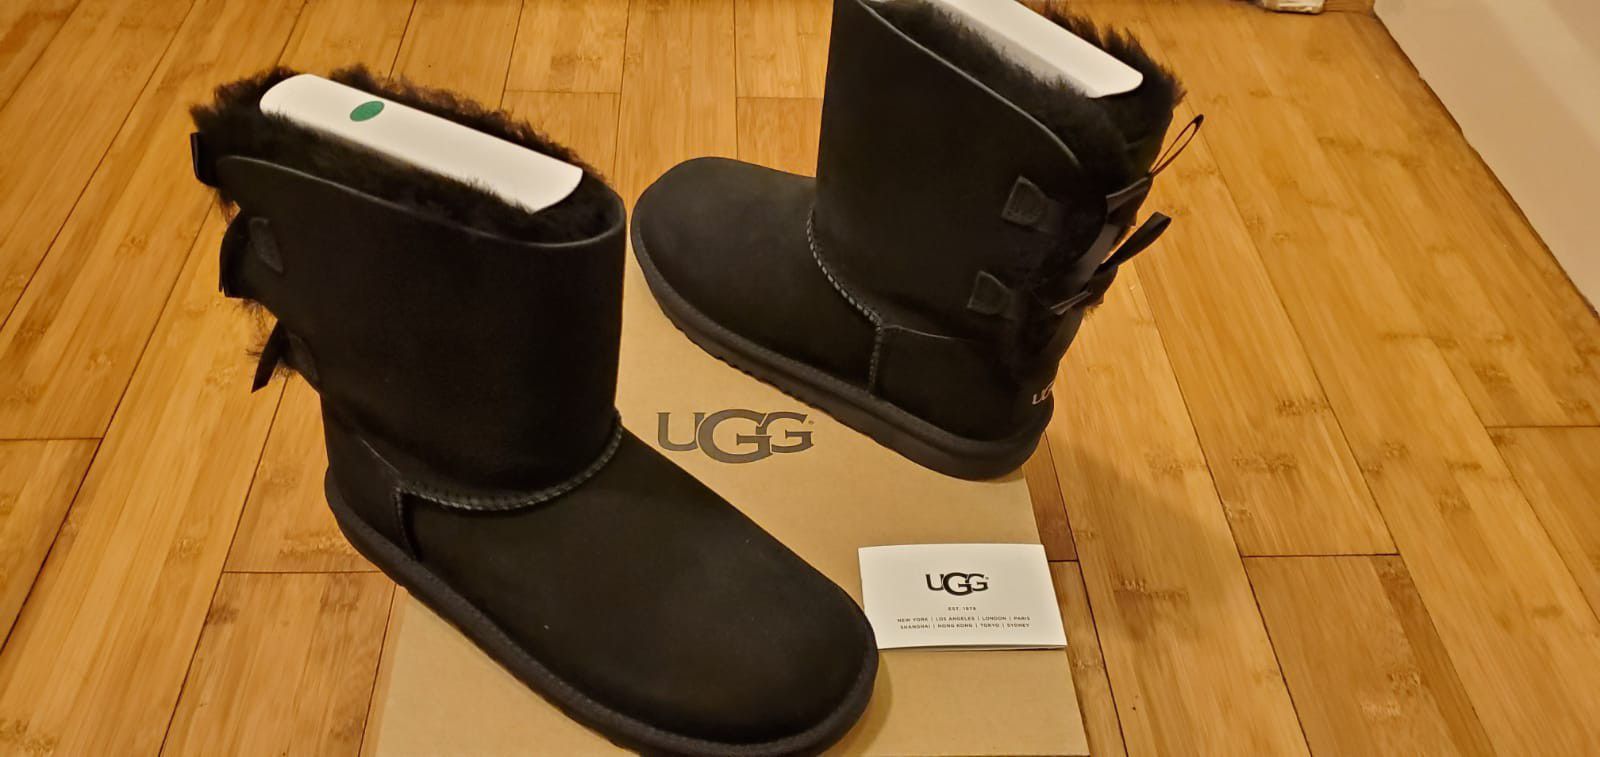 UGG Boots with 2 Bows in the Back size 7 and 8 for Women .